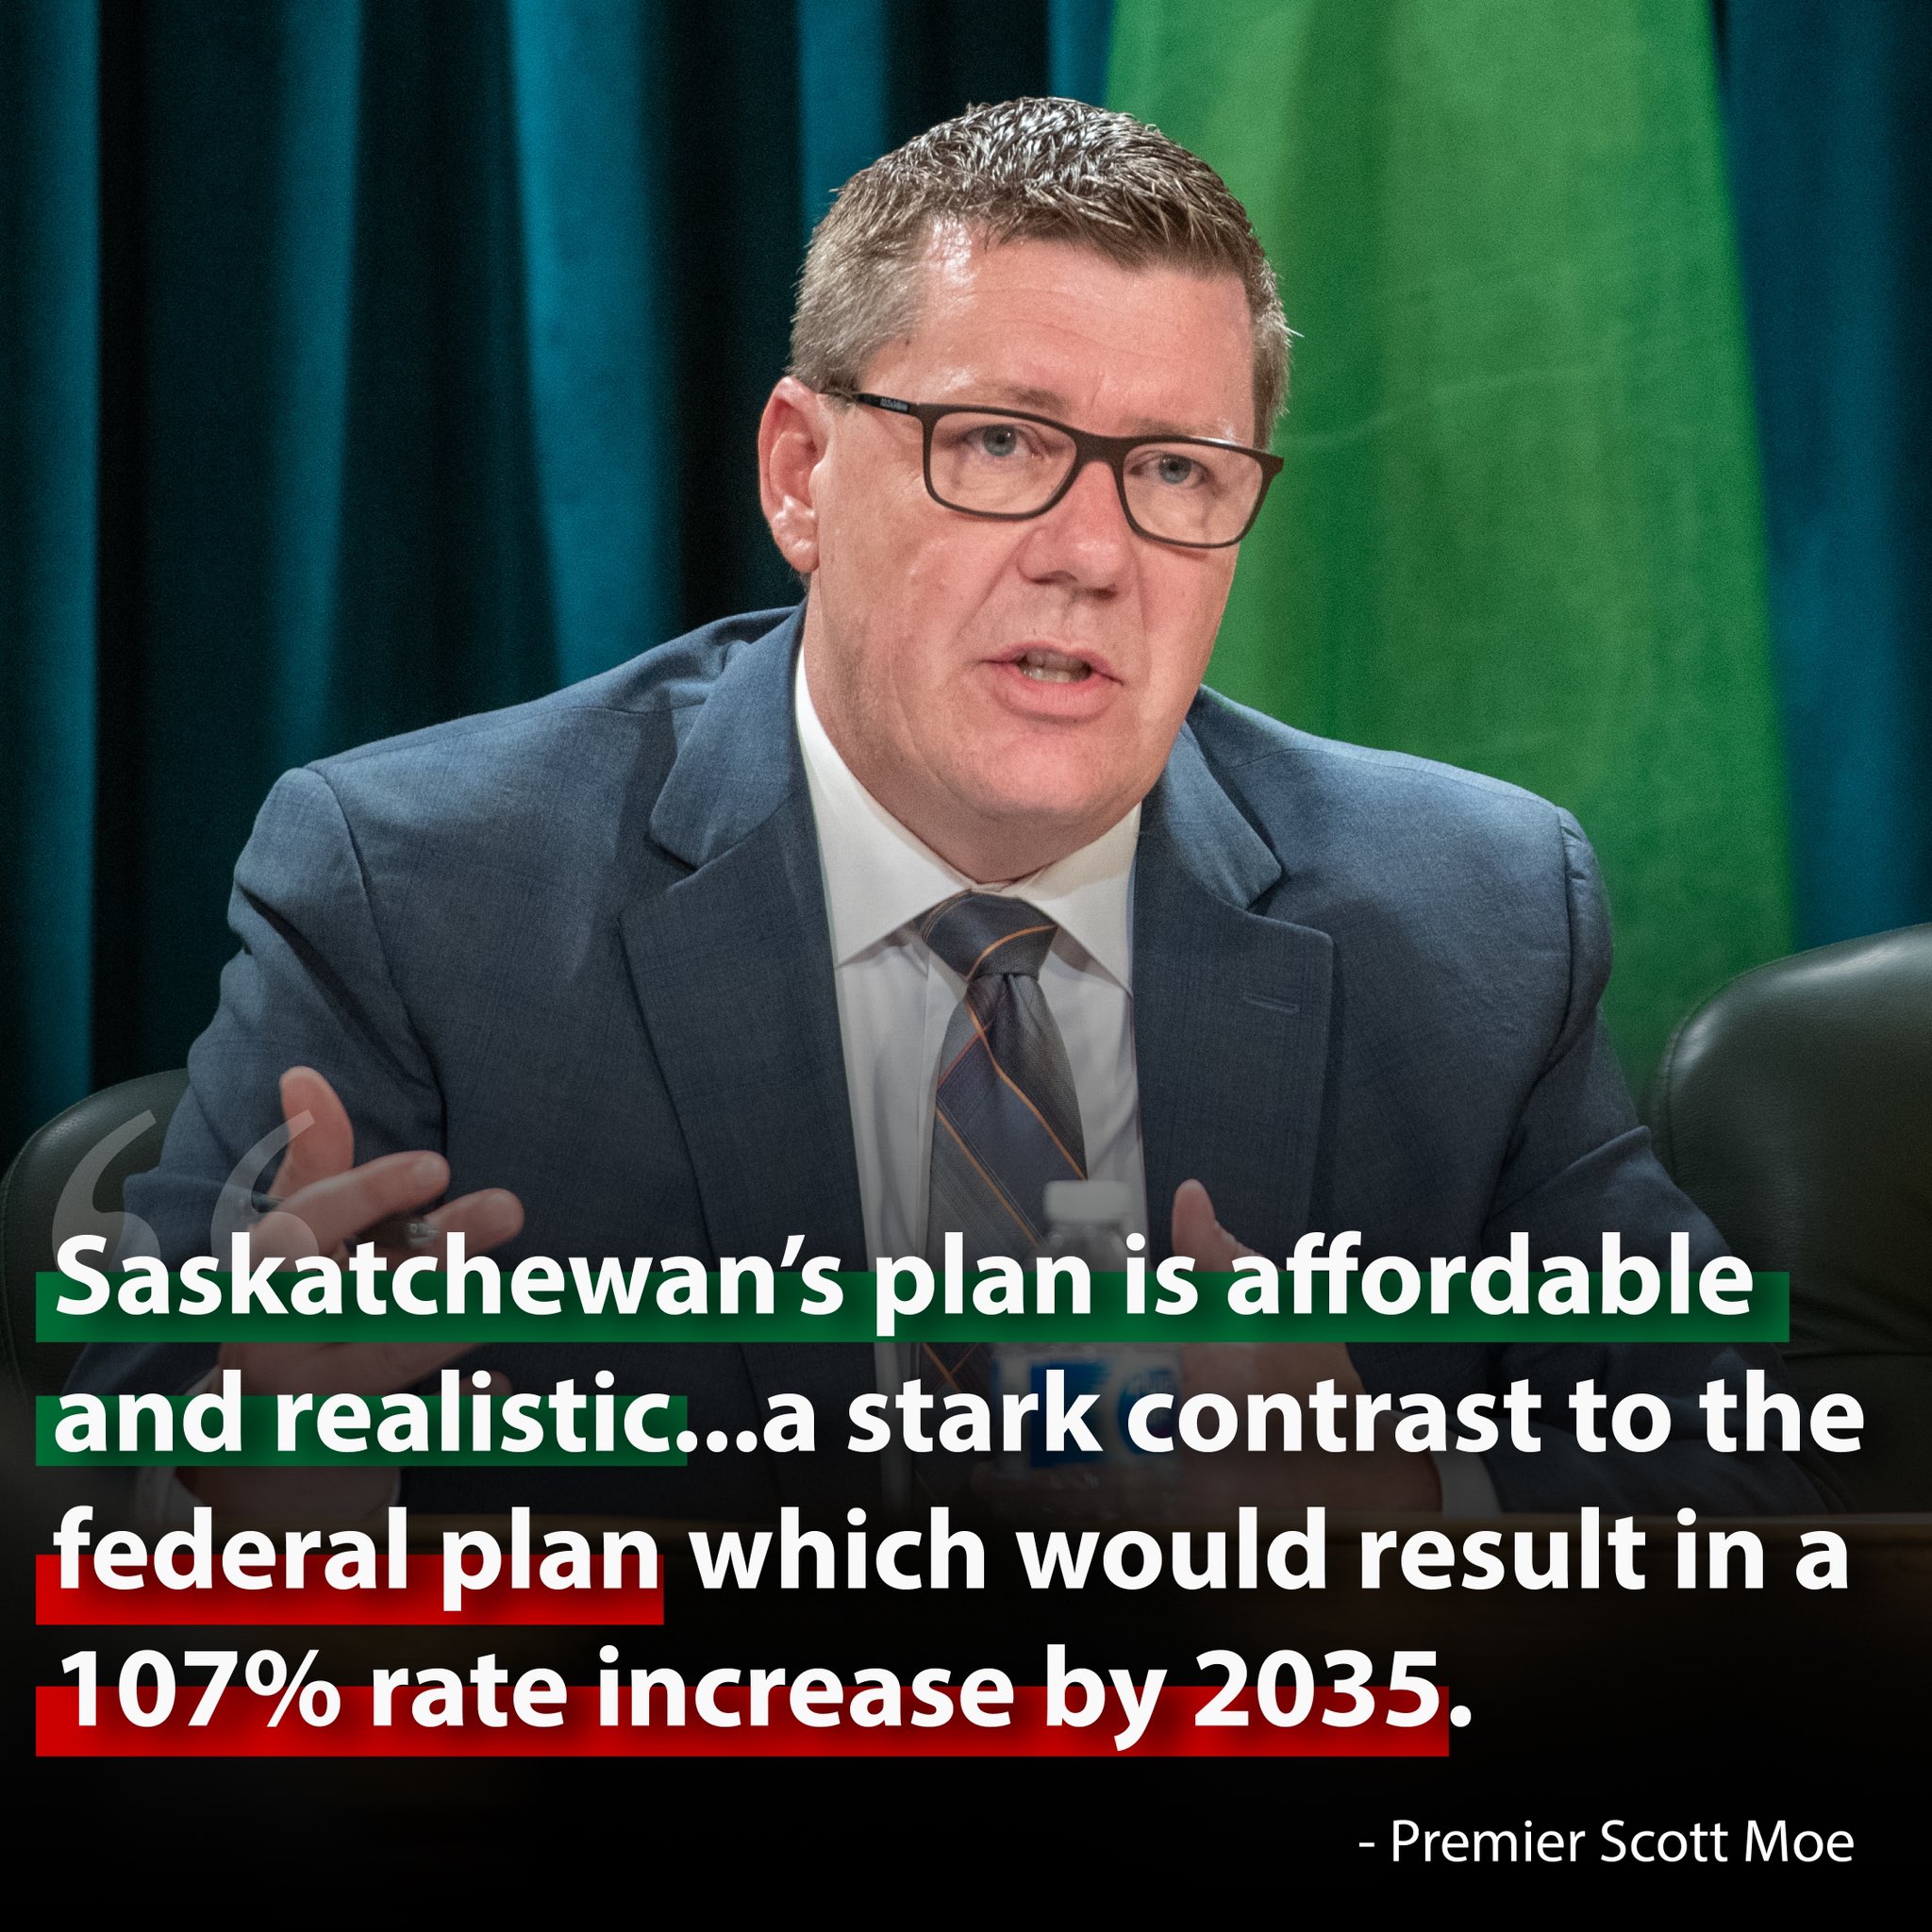 Scott Moe on X: We are coming to a crossroads and at stake is affordable  and reliable power across our province. The federal government's plan is  unaffordable, jeopardizes the reliability of our